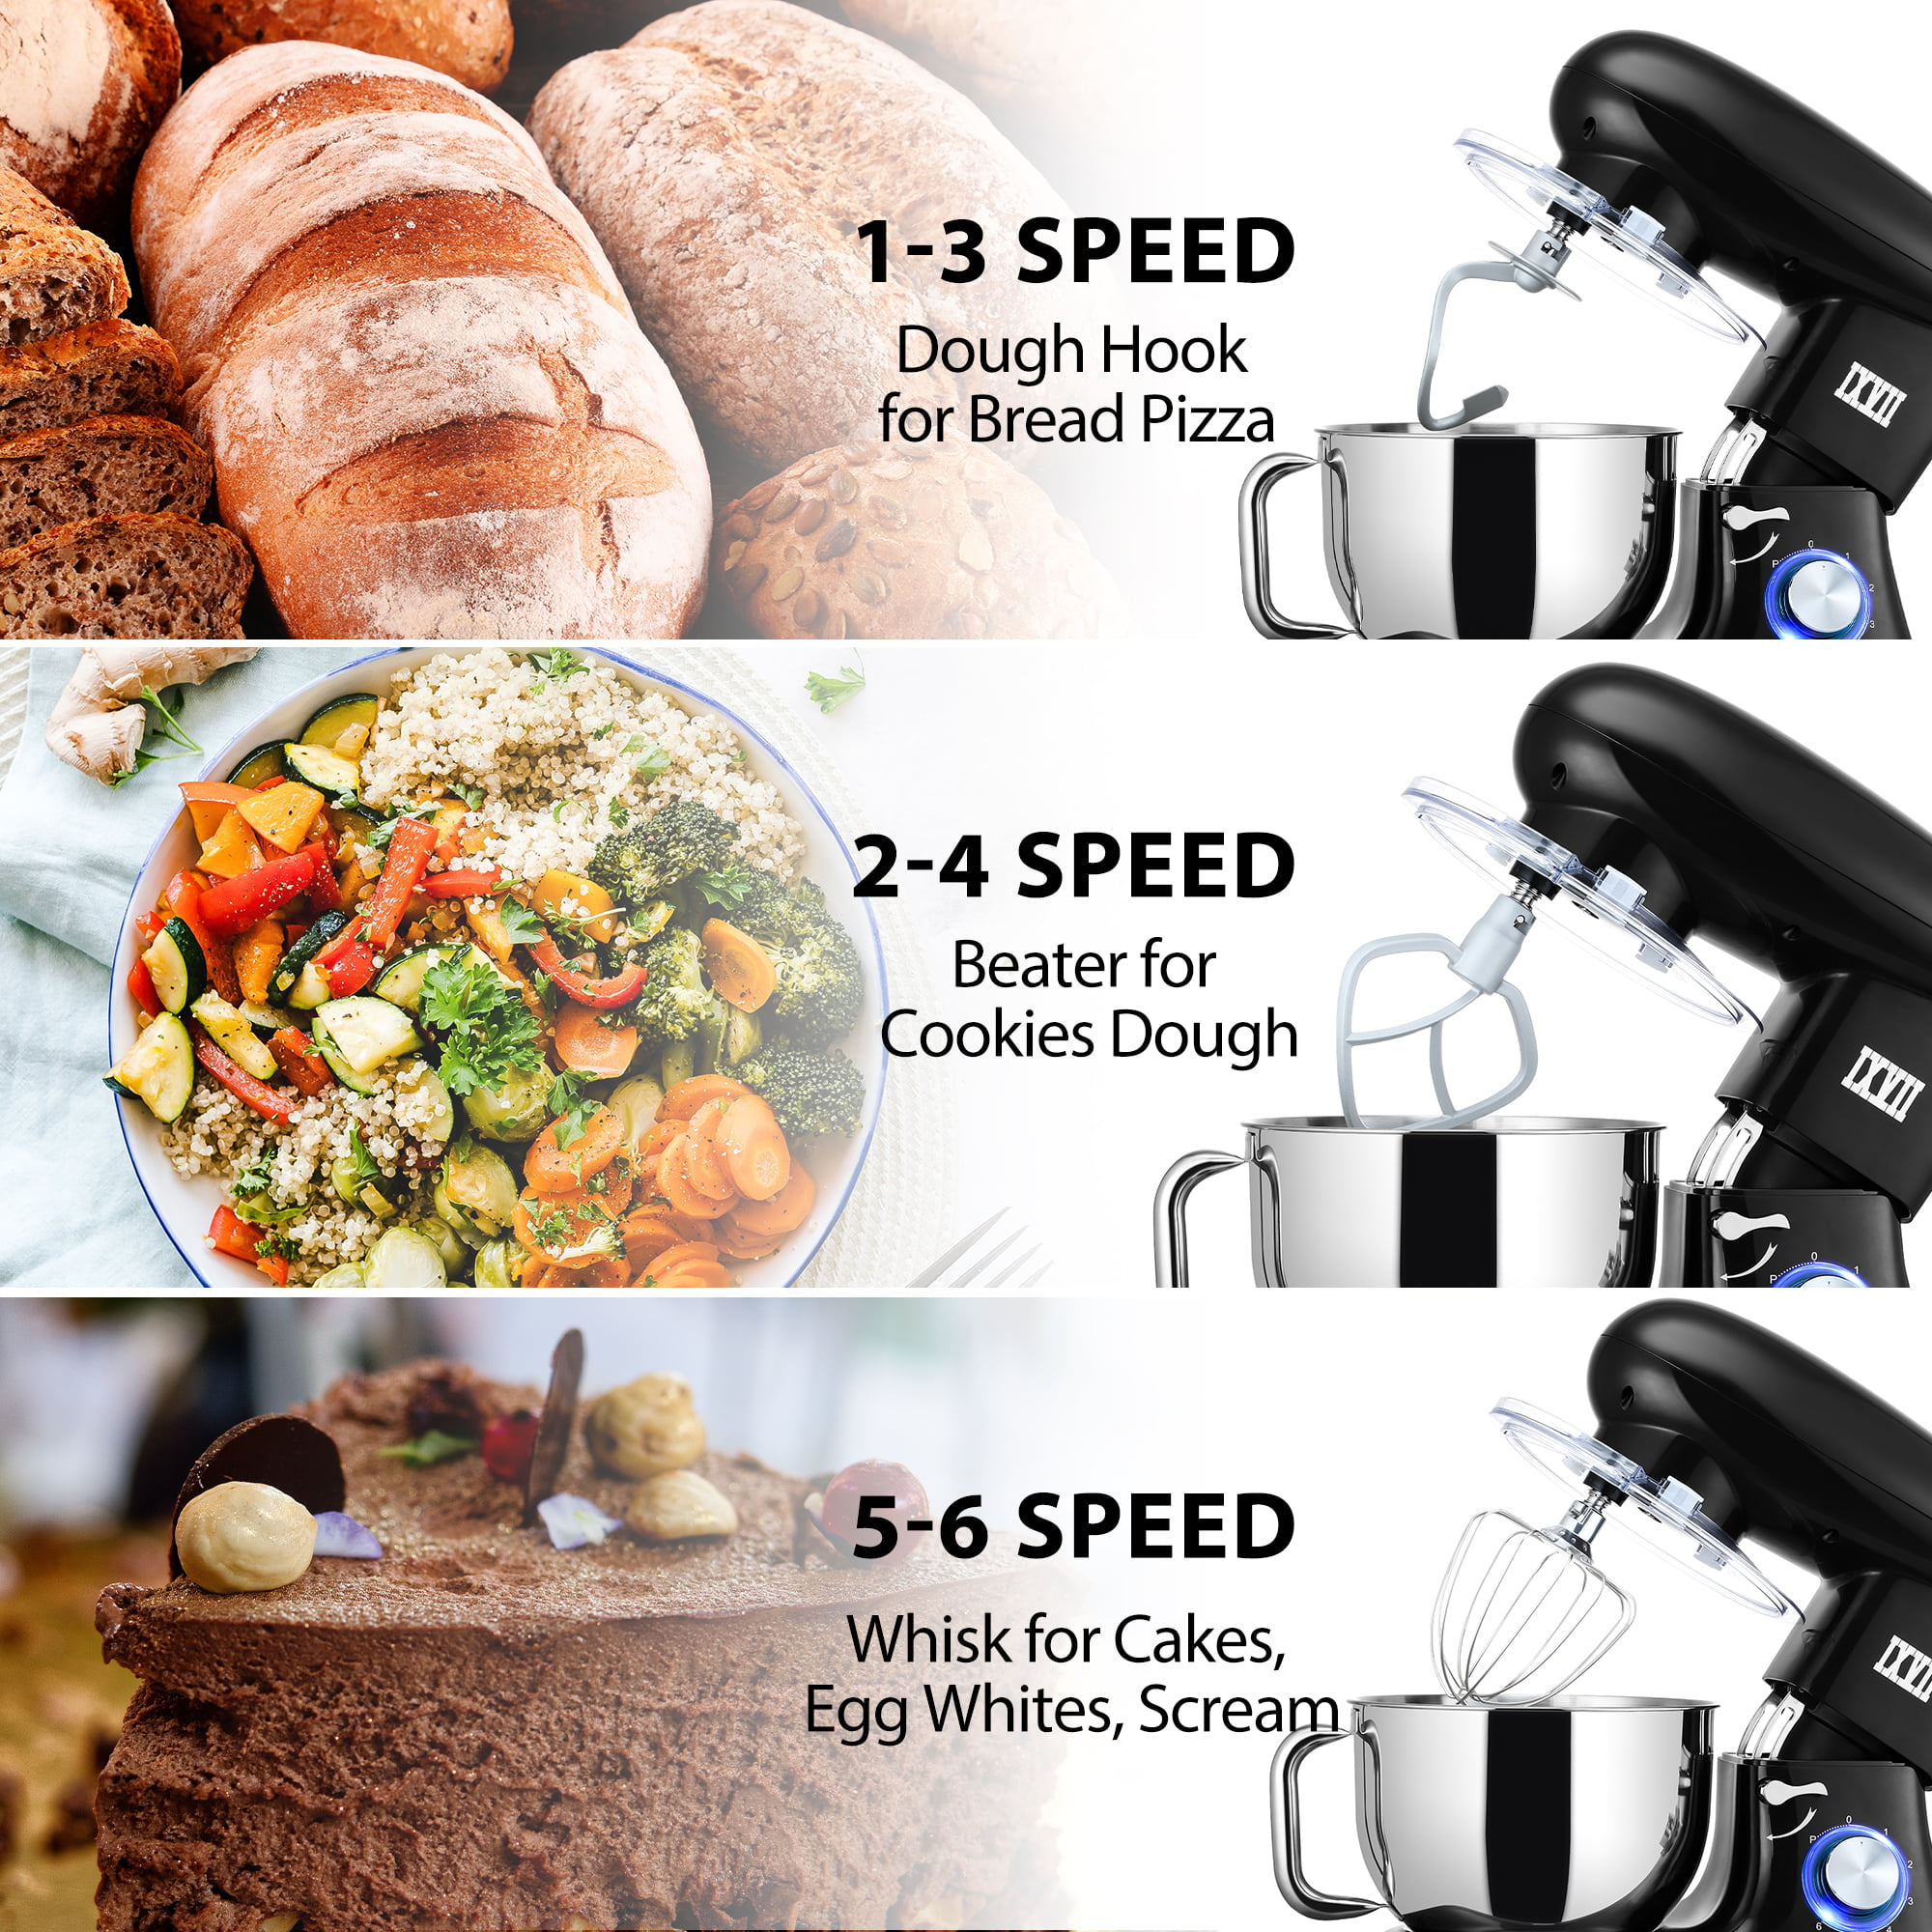  Cake Mixer Stand Mixers 6.5 L Stand Mixers With Stainless Steel  Bowl 1300W High Power Food Mixer With Dough Hook, Whisk, Beater, Glass Jar,  Meat Grinder (Color : Black): Home 